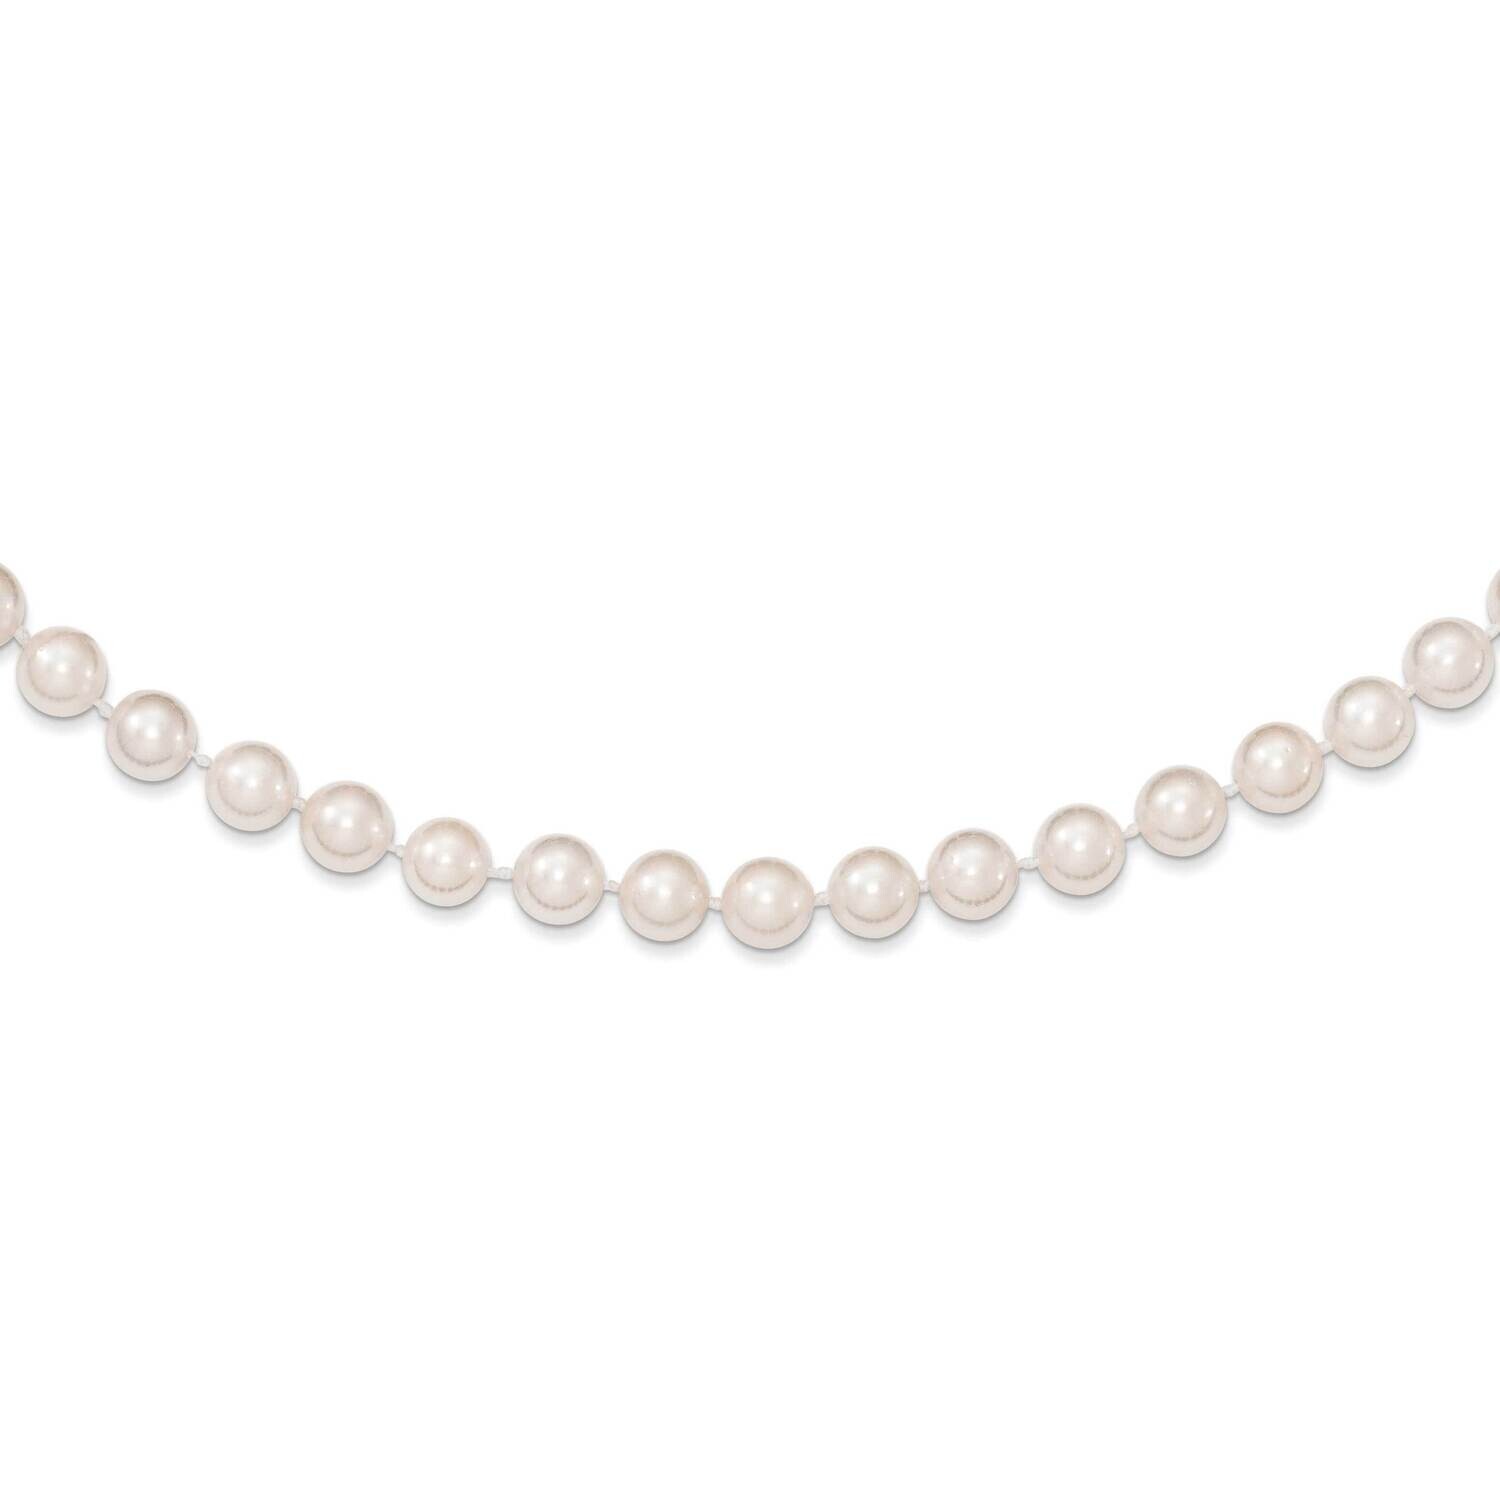 6-7mm Round White Saltwater Akoya Cultured Pearl Necklace 20 Inch 14k Gold PL60A-20